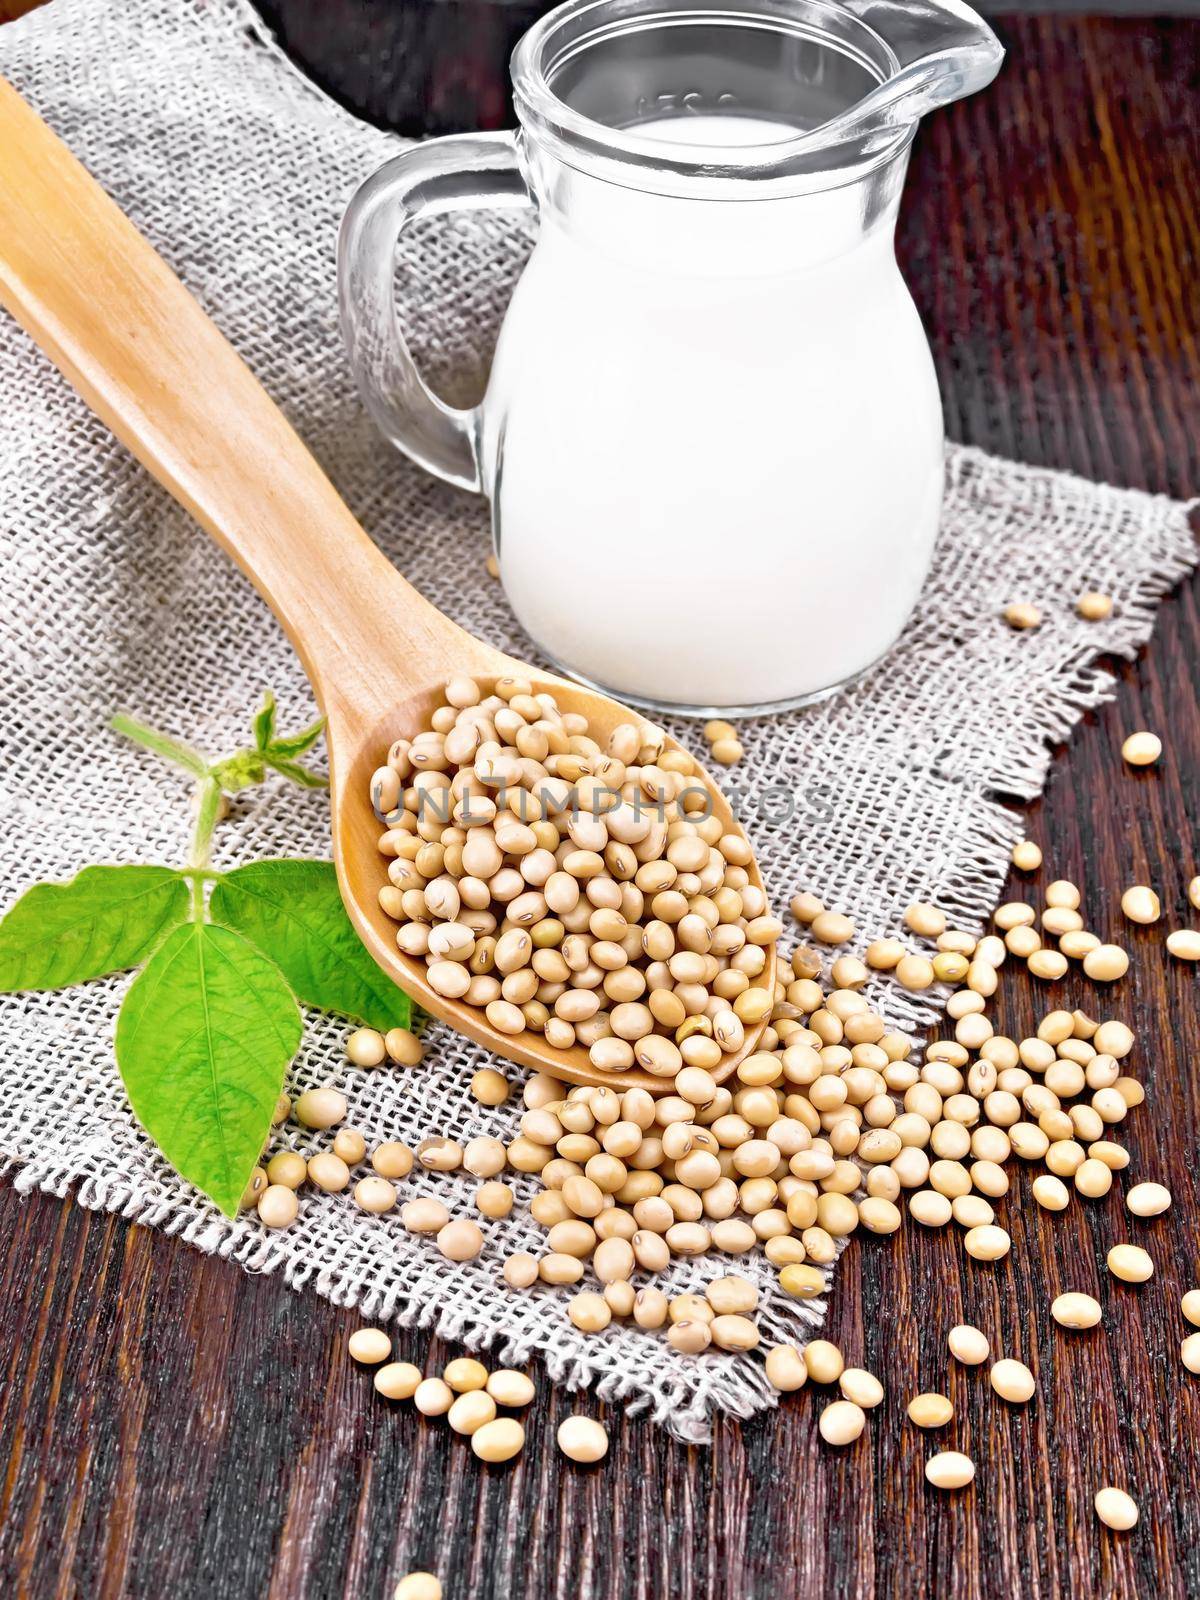 Soy beans in a spoon, milk in a jug and a green leaf on burlap on dark wooden board background